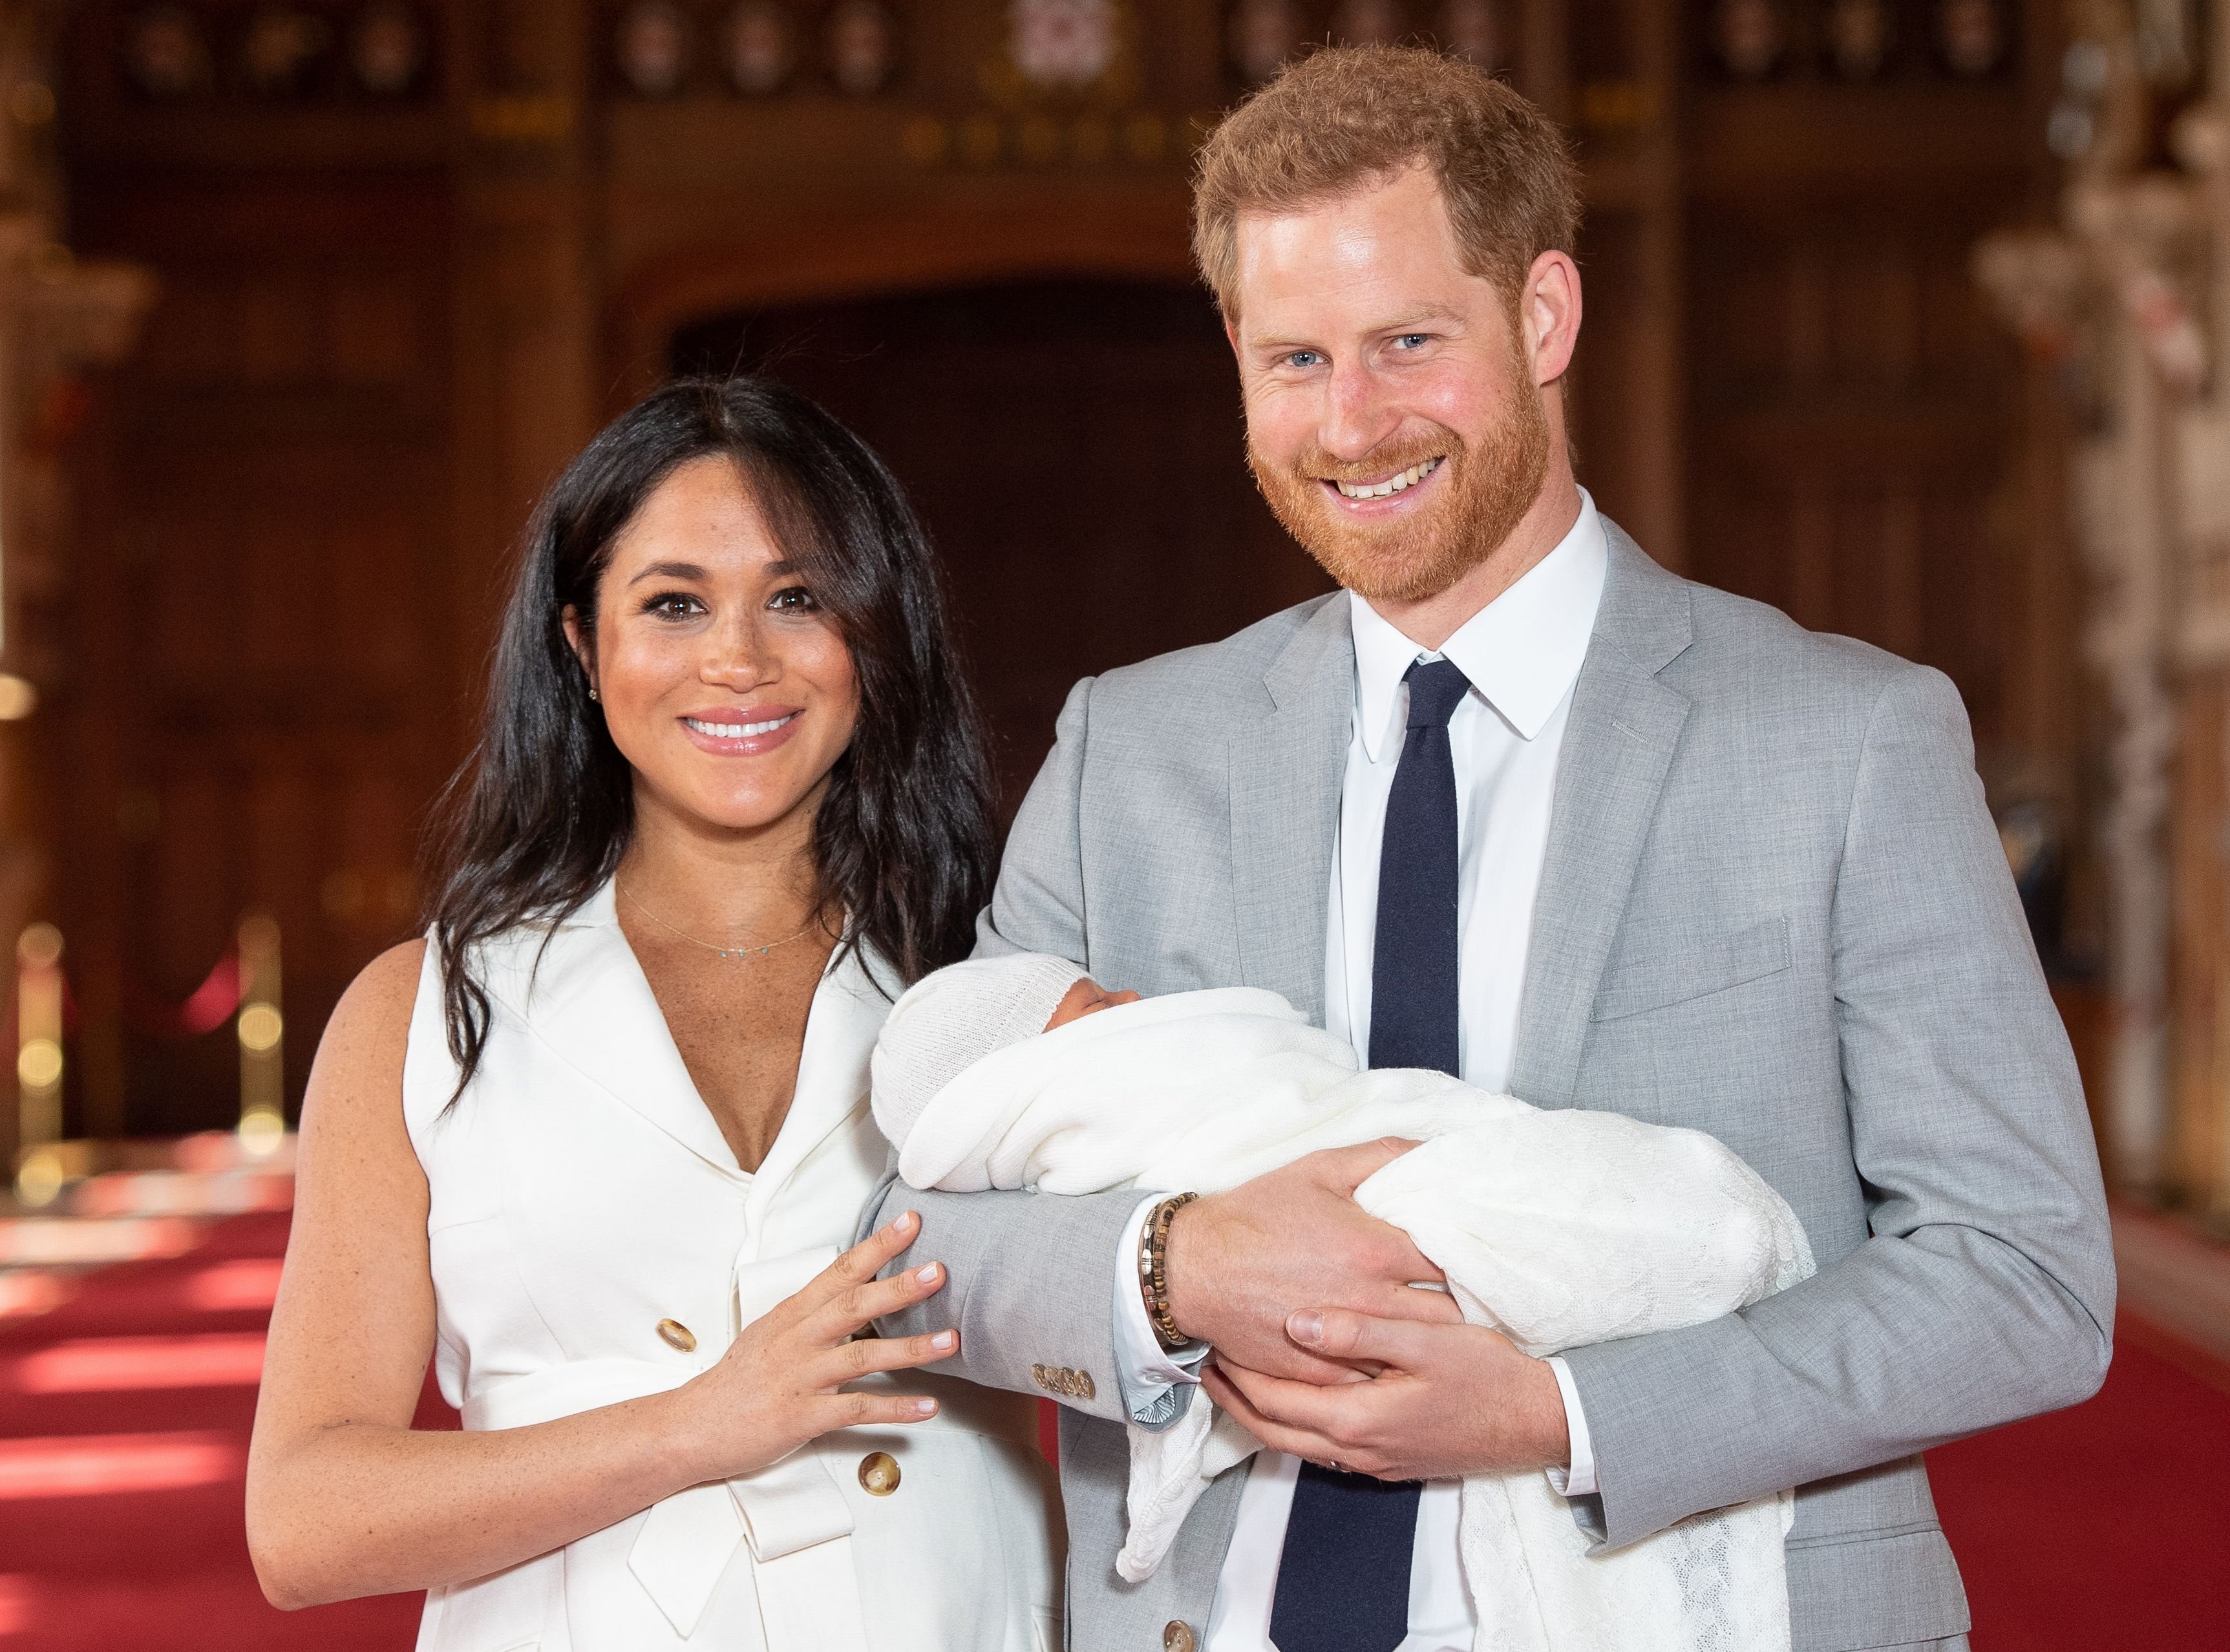 Duchess Meghan and Prince Harry pose for a photo with their newborn baby son, Archie Harrison Mountbatten-Windsor, in St George's Hall in Windsor on May 8, 2019 | Photo: Dominic Lipinski/POOL/AFP/Getty Images